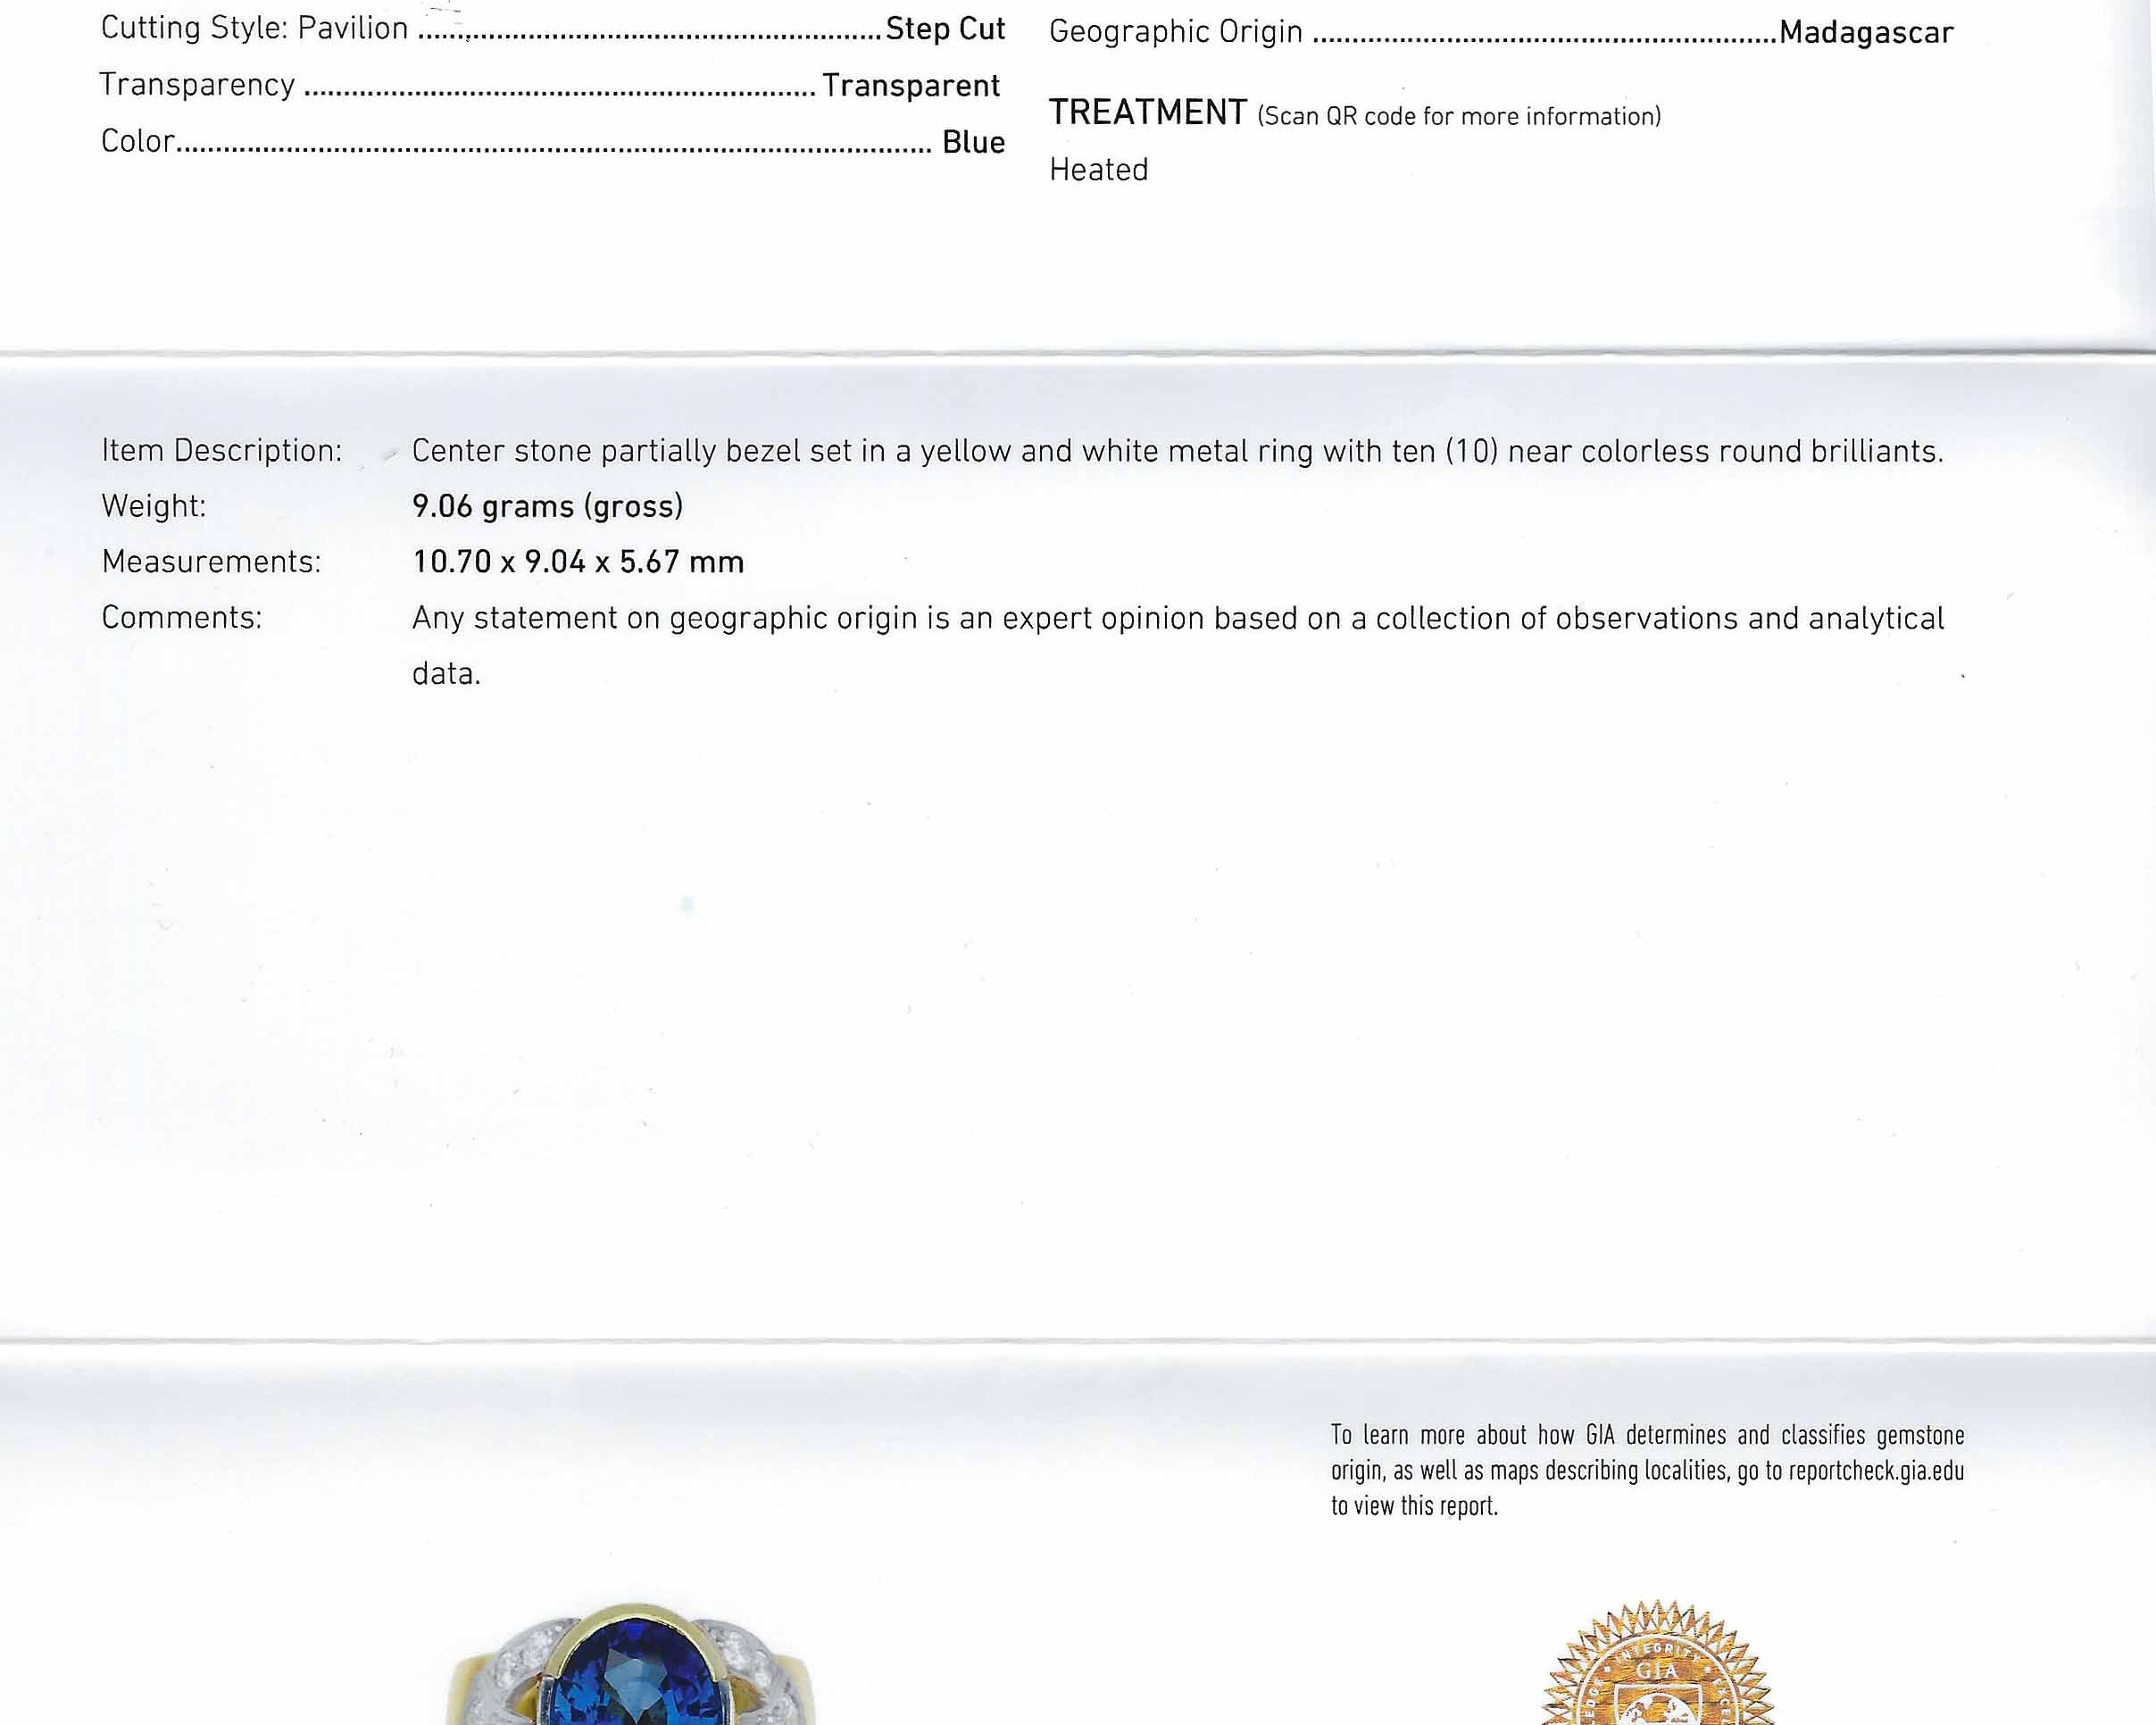 A GIA sapphire origin report is included with the ring.